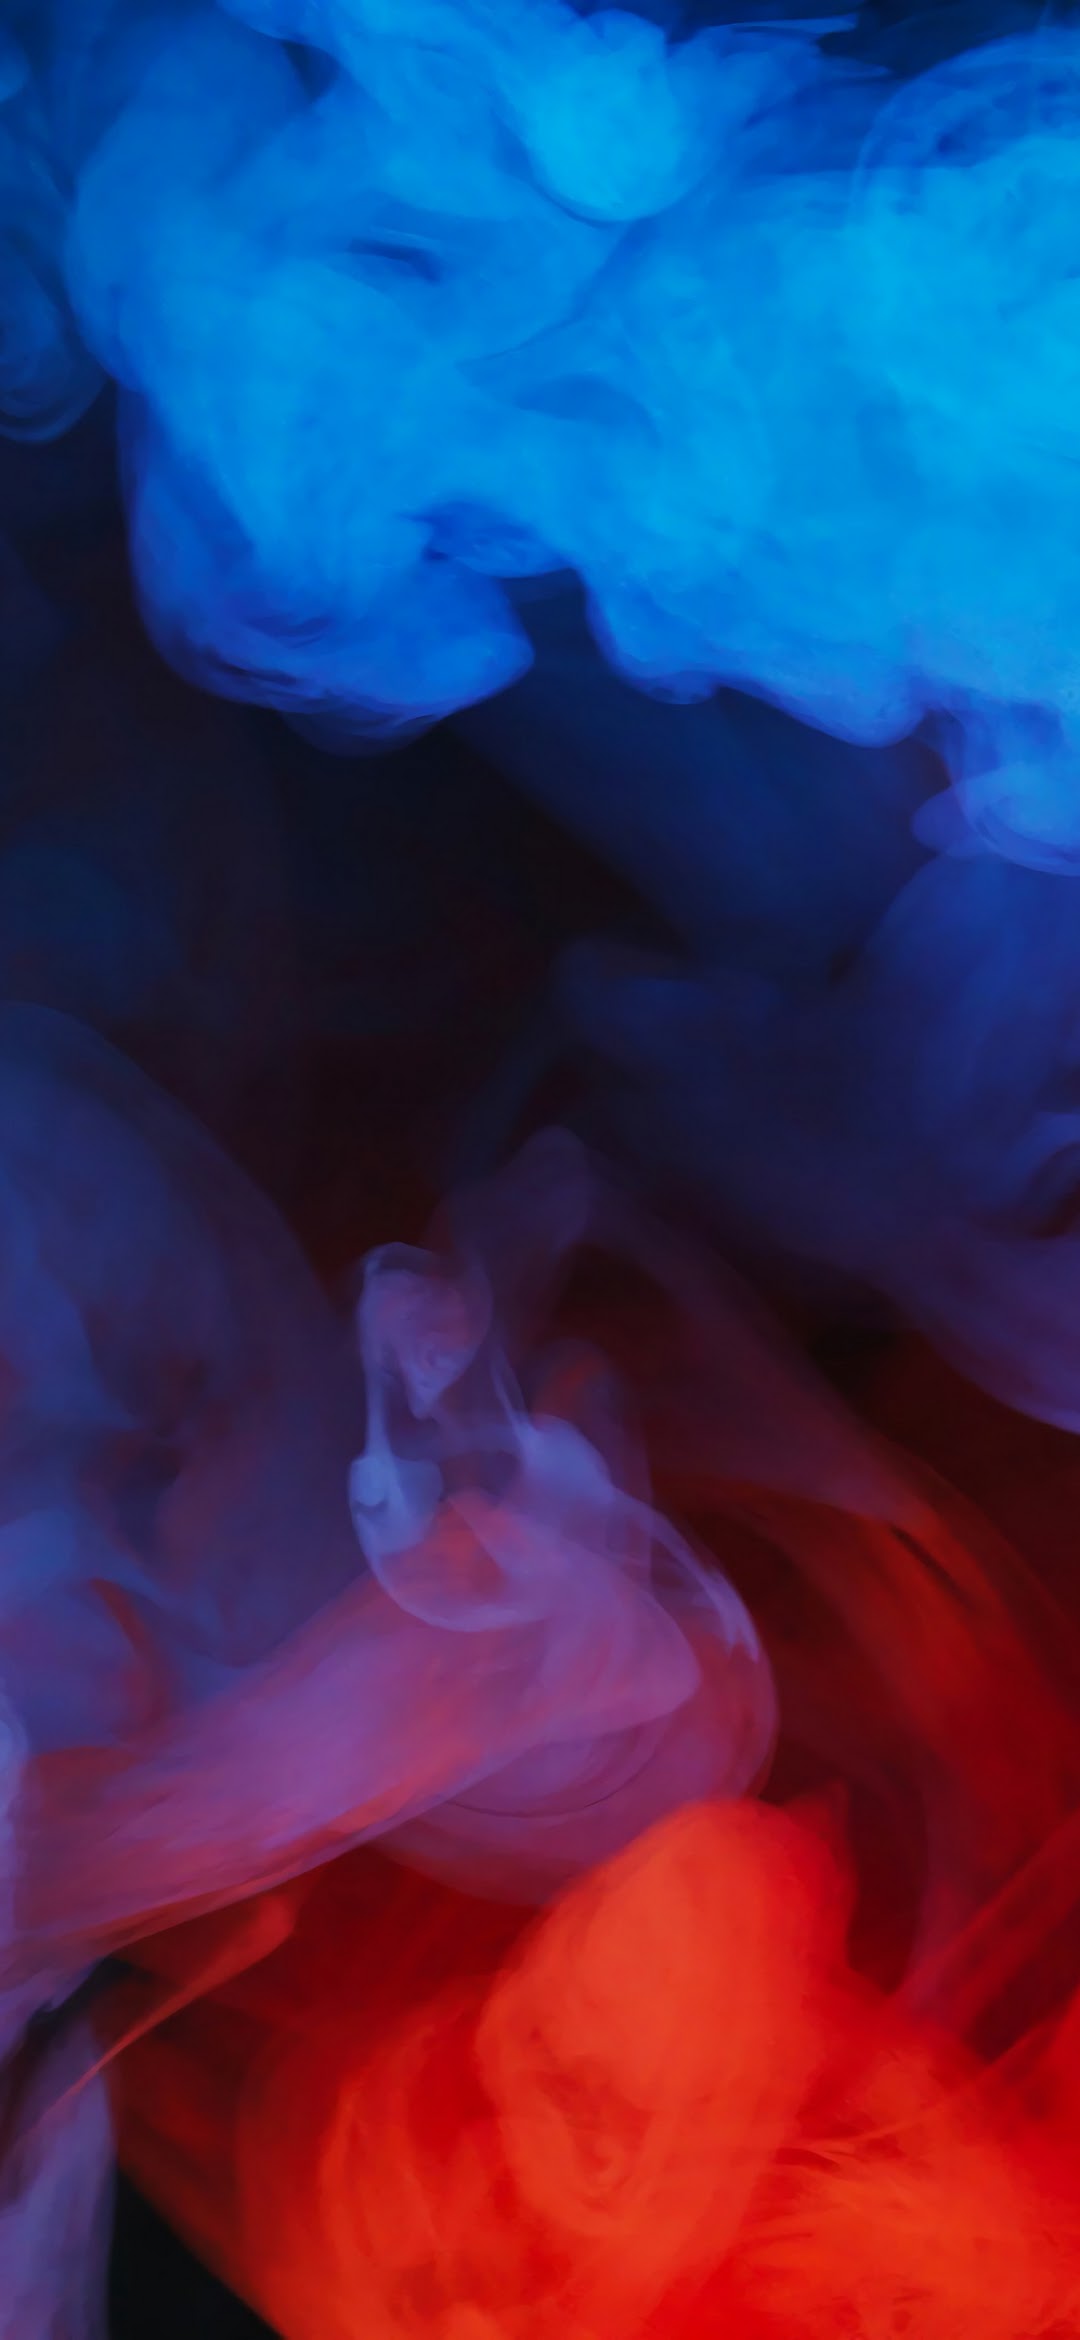 Blue Red Smoke Abstract 4k Wallpaper 53